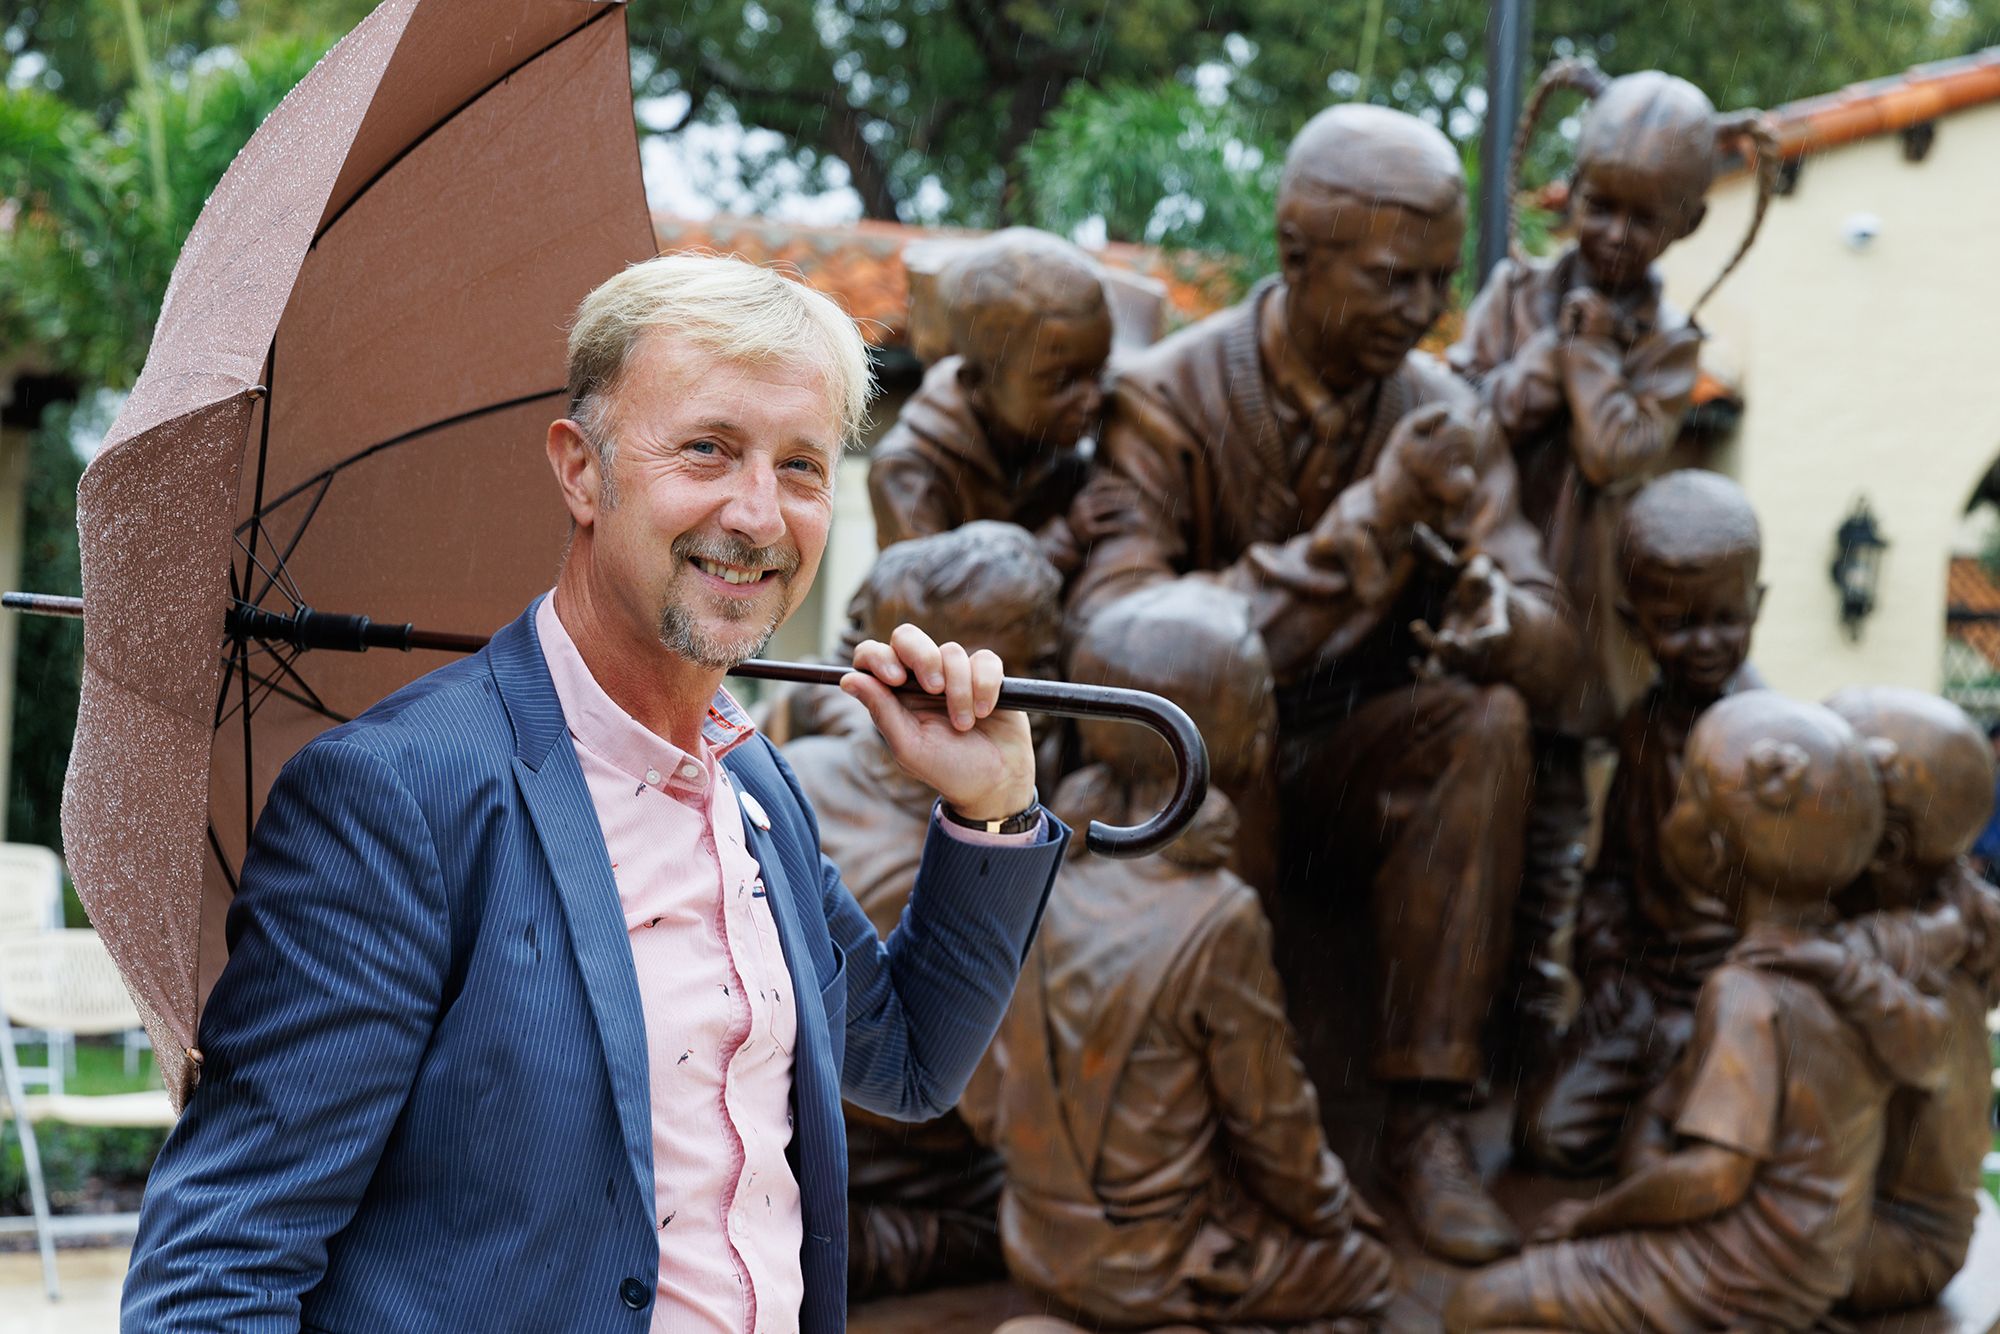 Artist Paul Day at the Mister Rogers sculpture unveiling